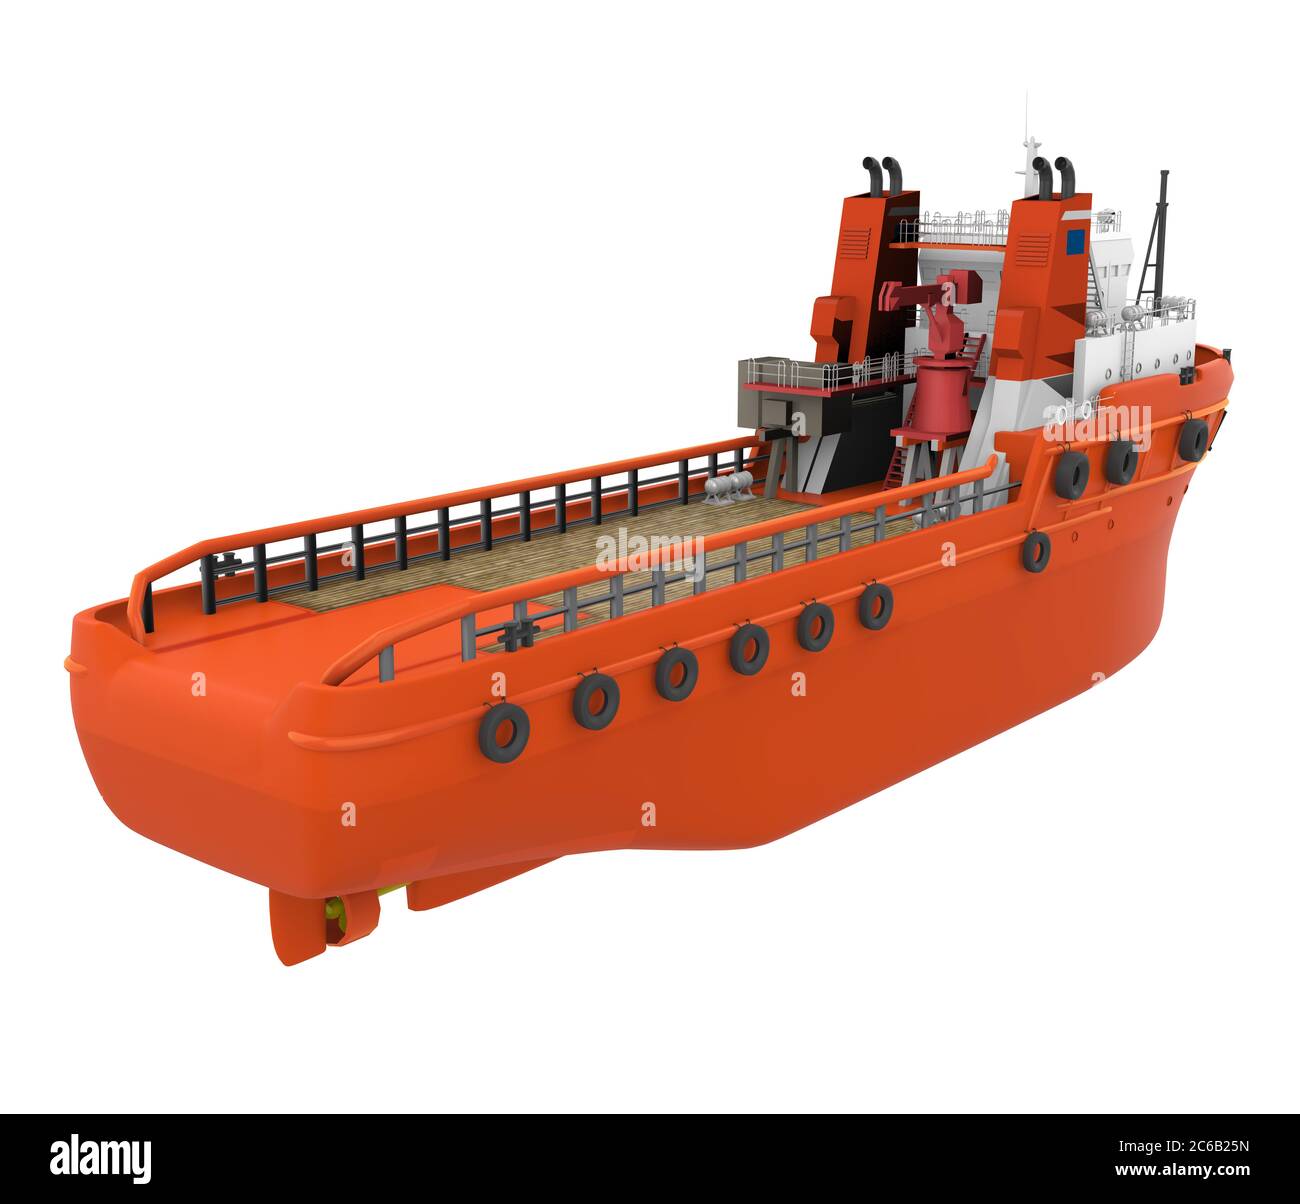 Anchor Handling Tug Supply Vessel Isolated Stock Photo